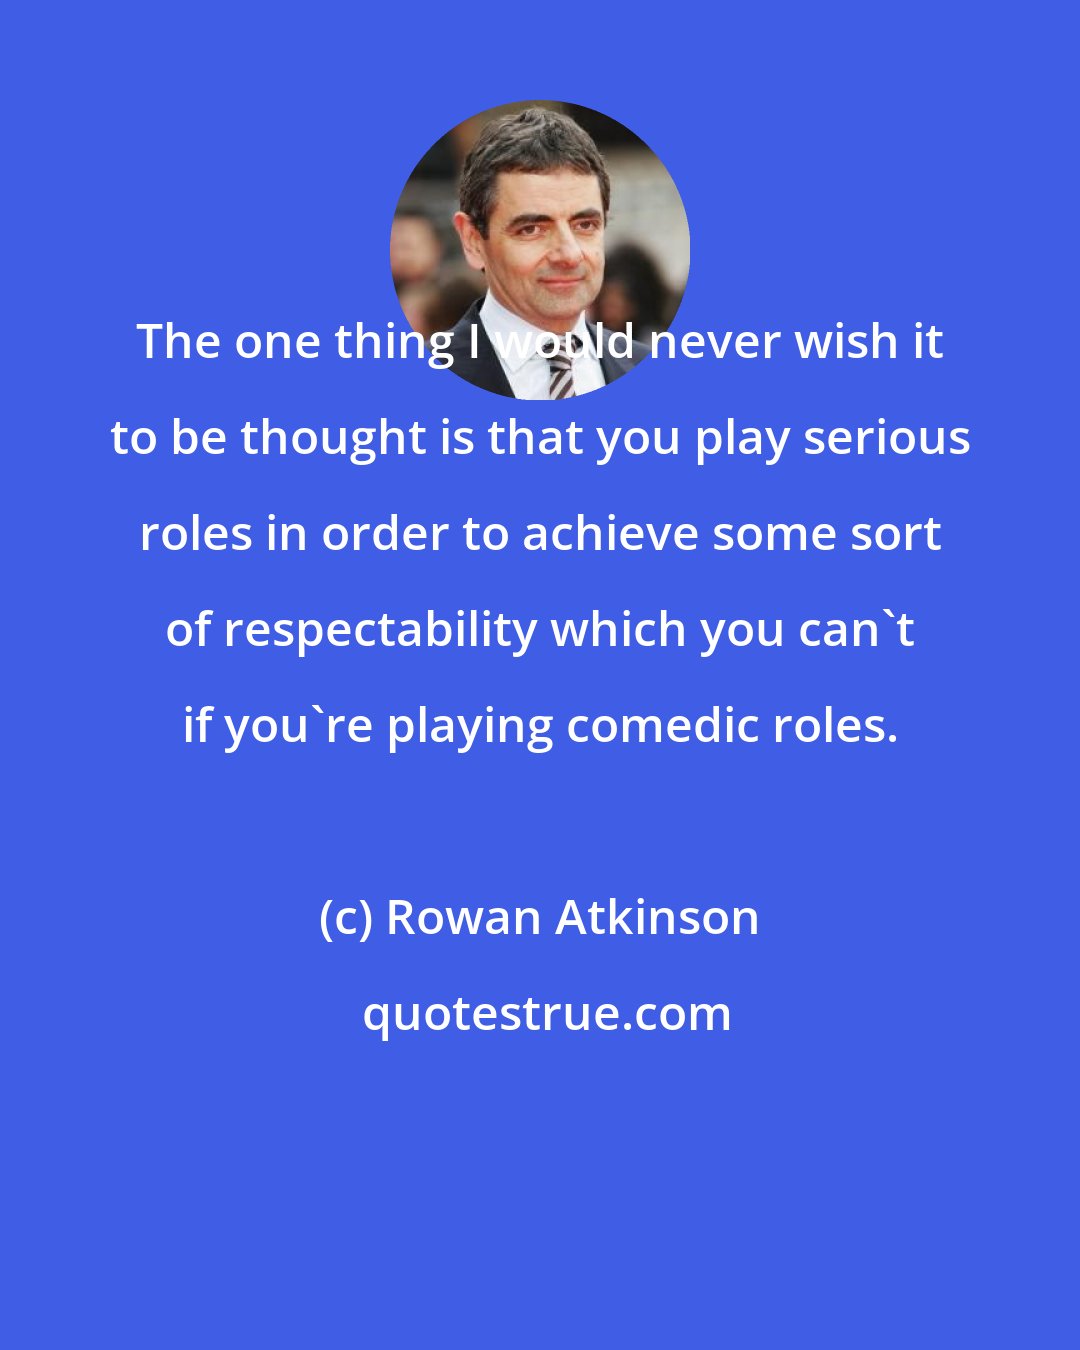 Rowan Atkinson: The one thing I would never wish it to be thought is that you play serious roles in order to achieve some sort of respectability which you can't if you're playing comedic roles.